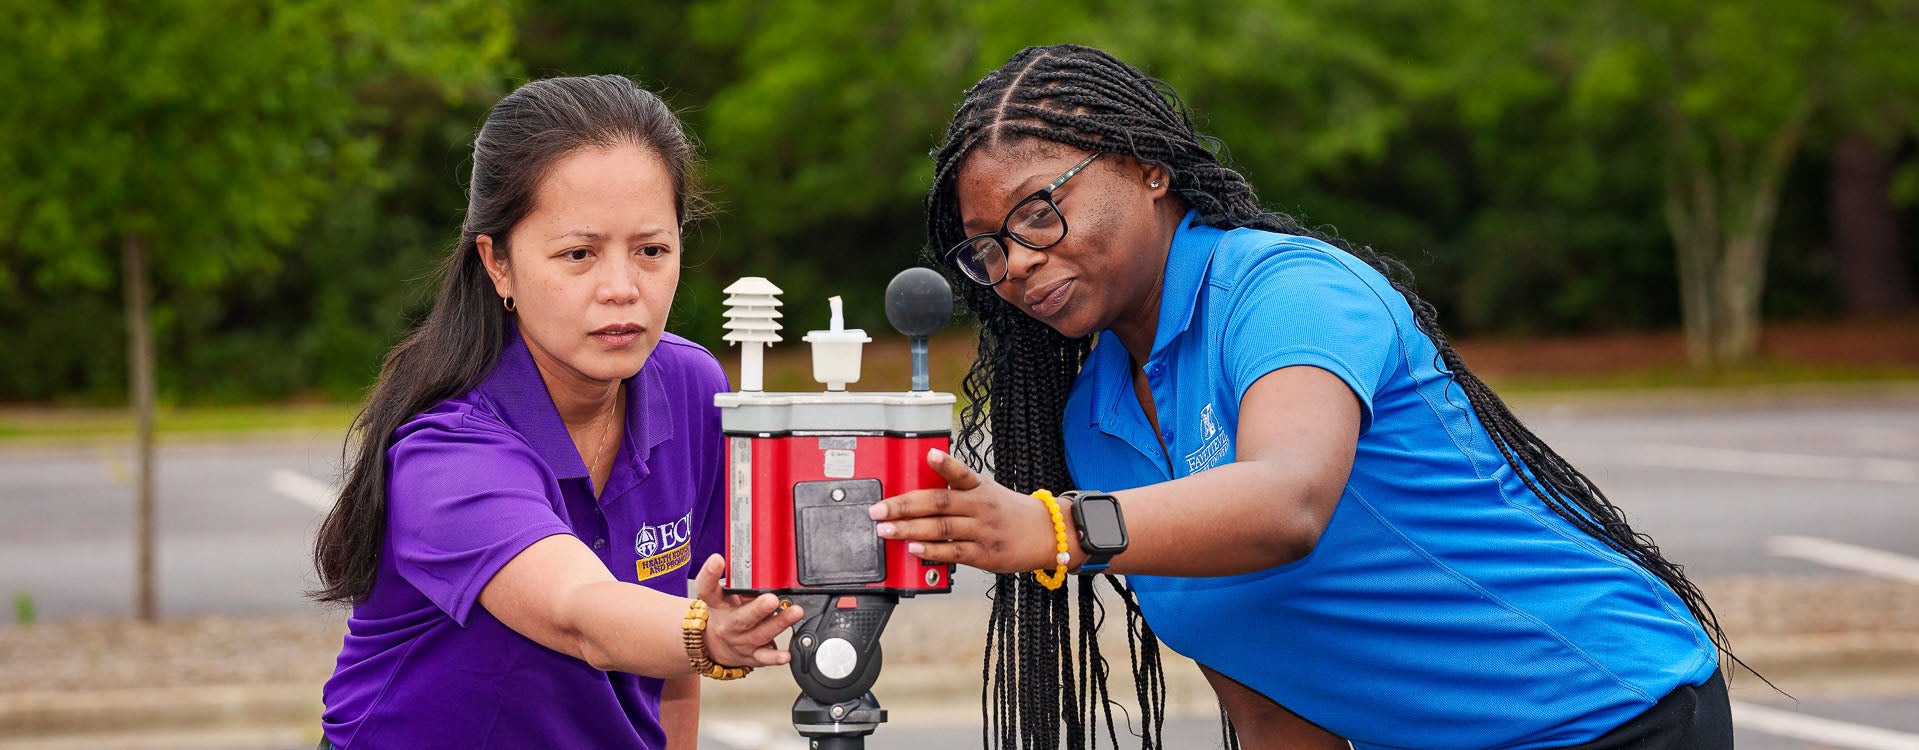 Jo Anne Balanay and FSU student setting up heat monitoring equipment. This is part of Glaxo Smith Kline Foundation funding for the ECU STEM Summer Immersion programs.